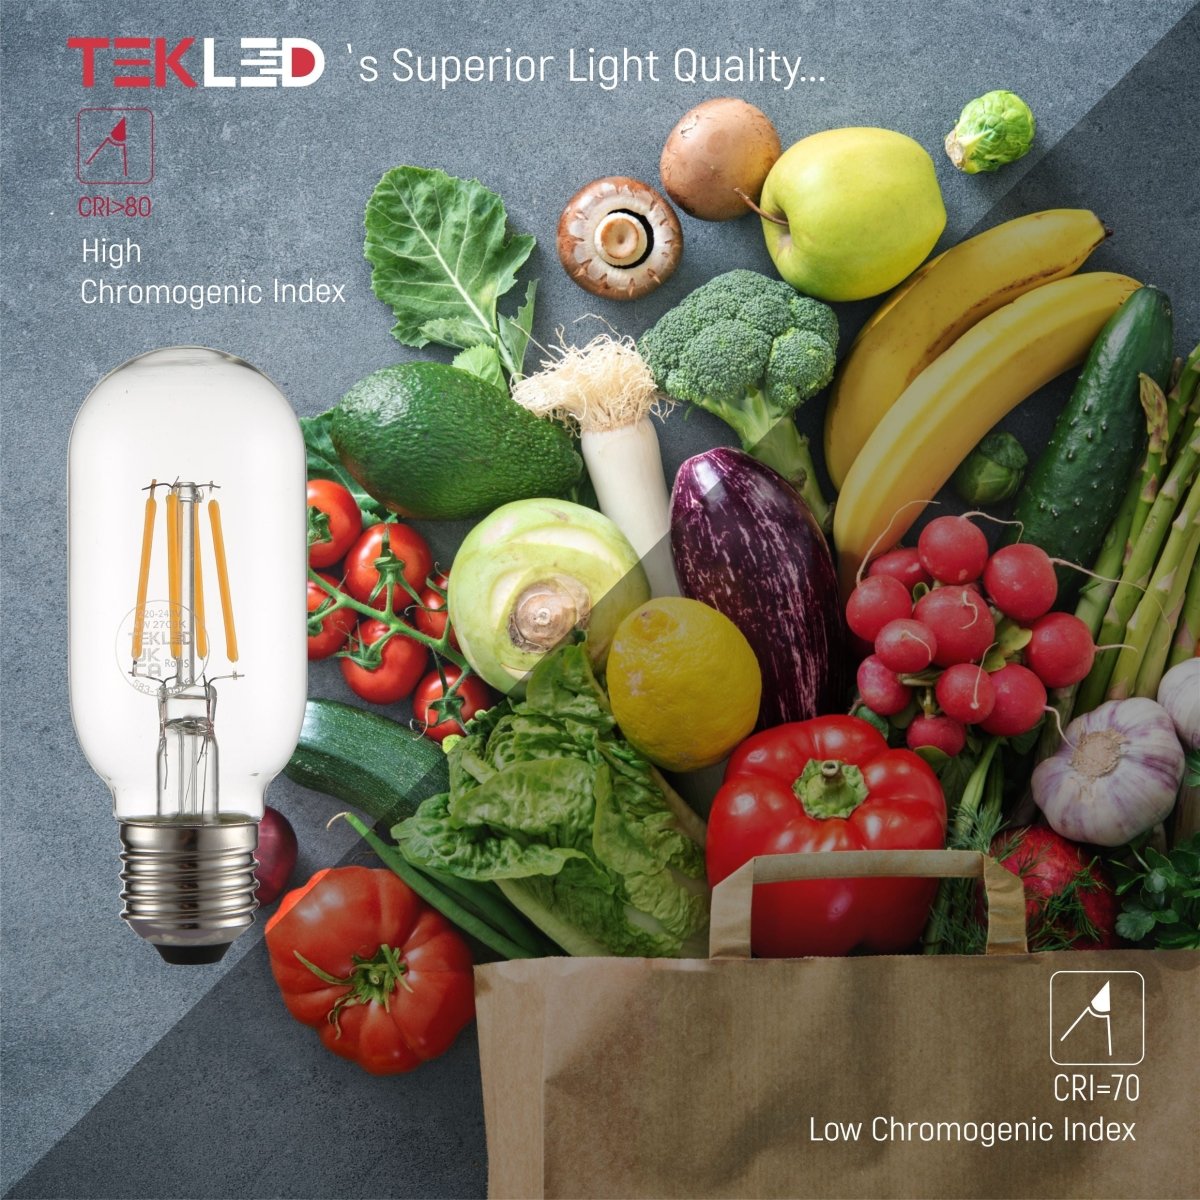 Comparison of CRI of LED Dimmable Filament Bulb T45 Tubular E27 Edison Screw 4W 470lm Warm White 2700K Clear Pack of 4 | TEKLED 583-150525